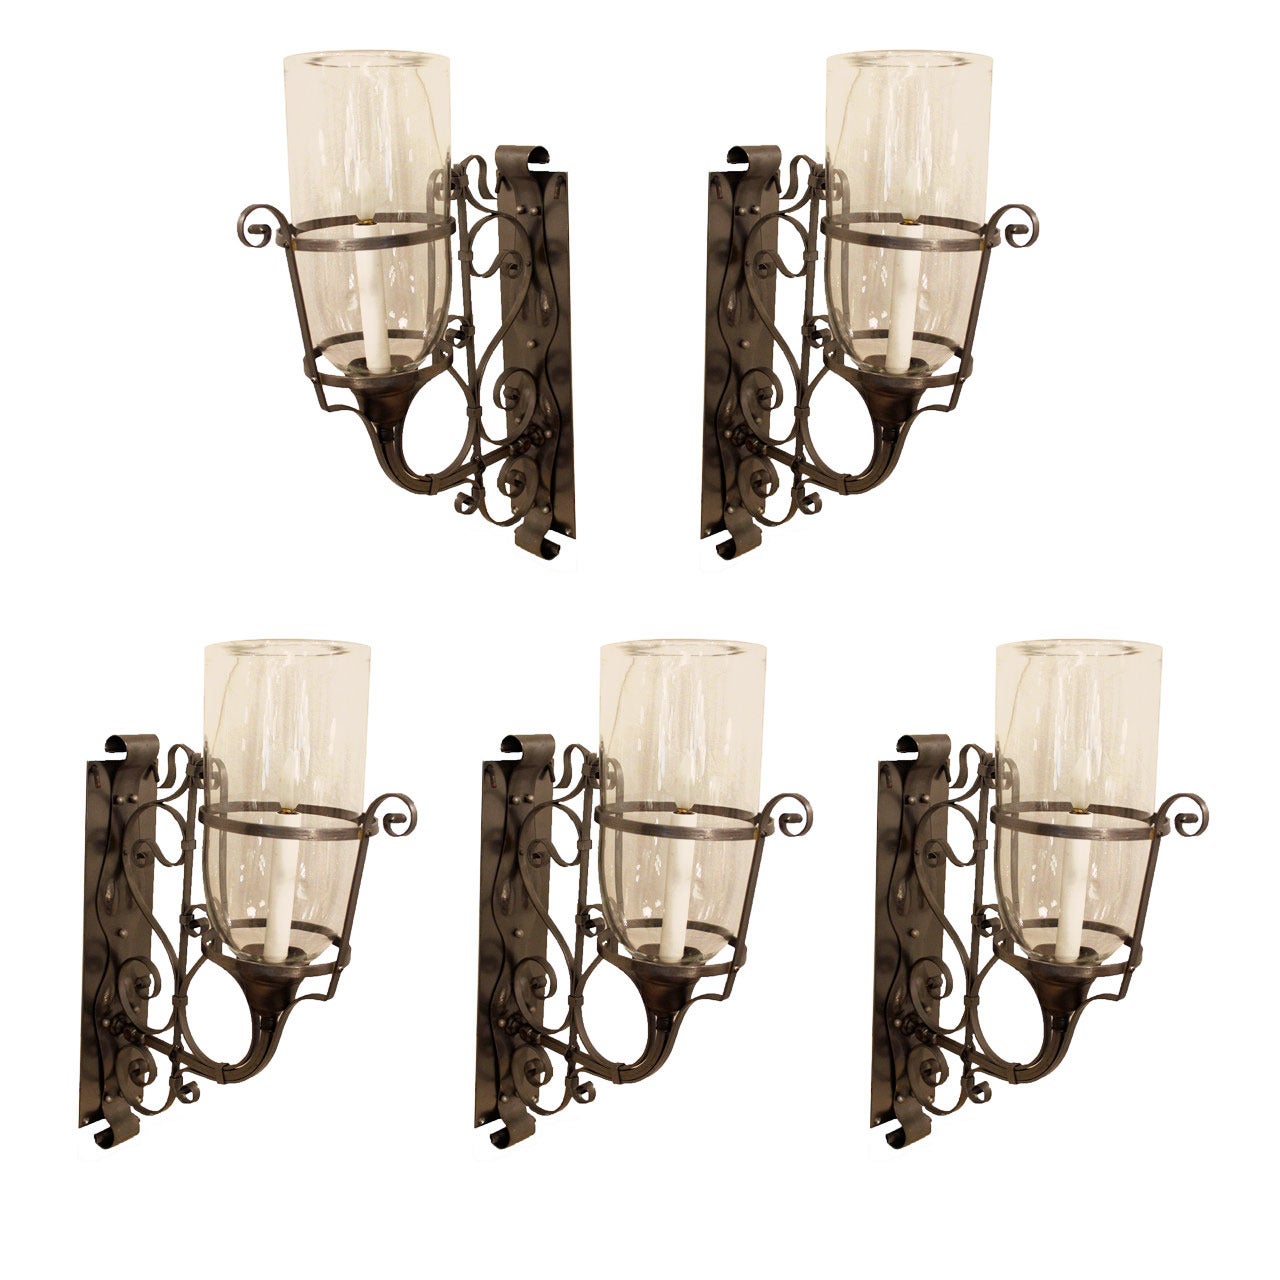 Antique Wall Sconce with Hurricane Glass